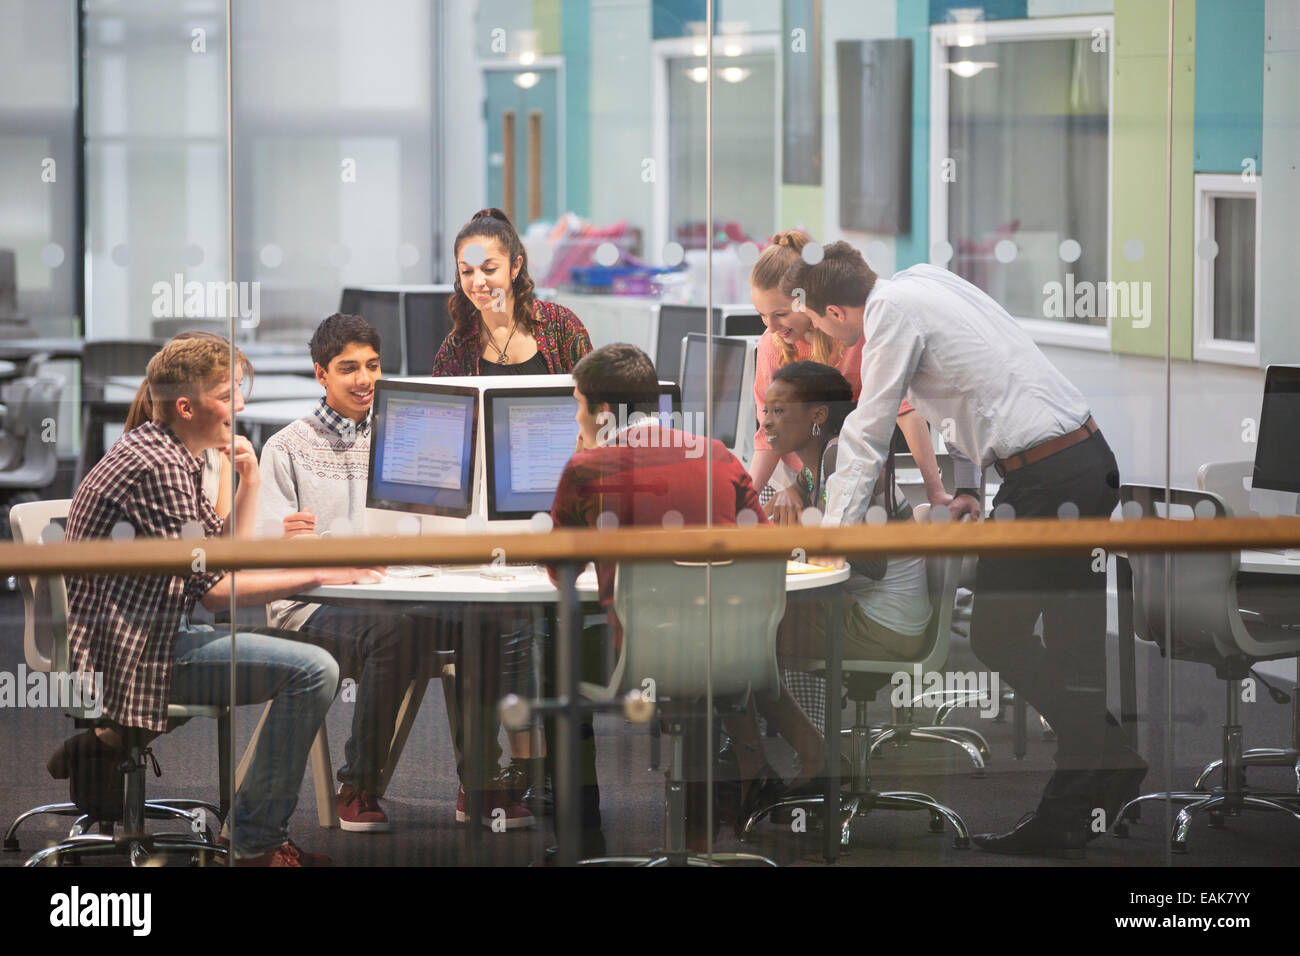 Students during IT lesson in modern classroom with glass walls Stock Photo